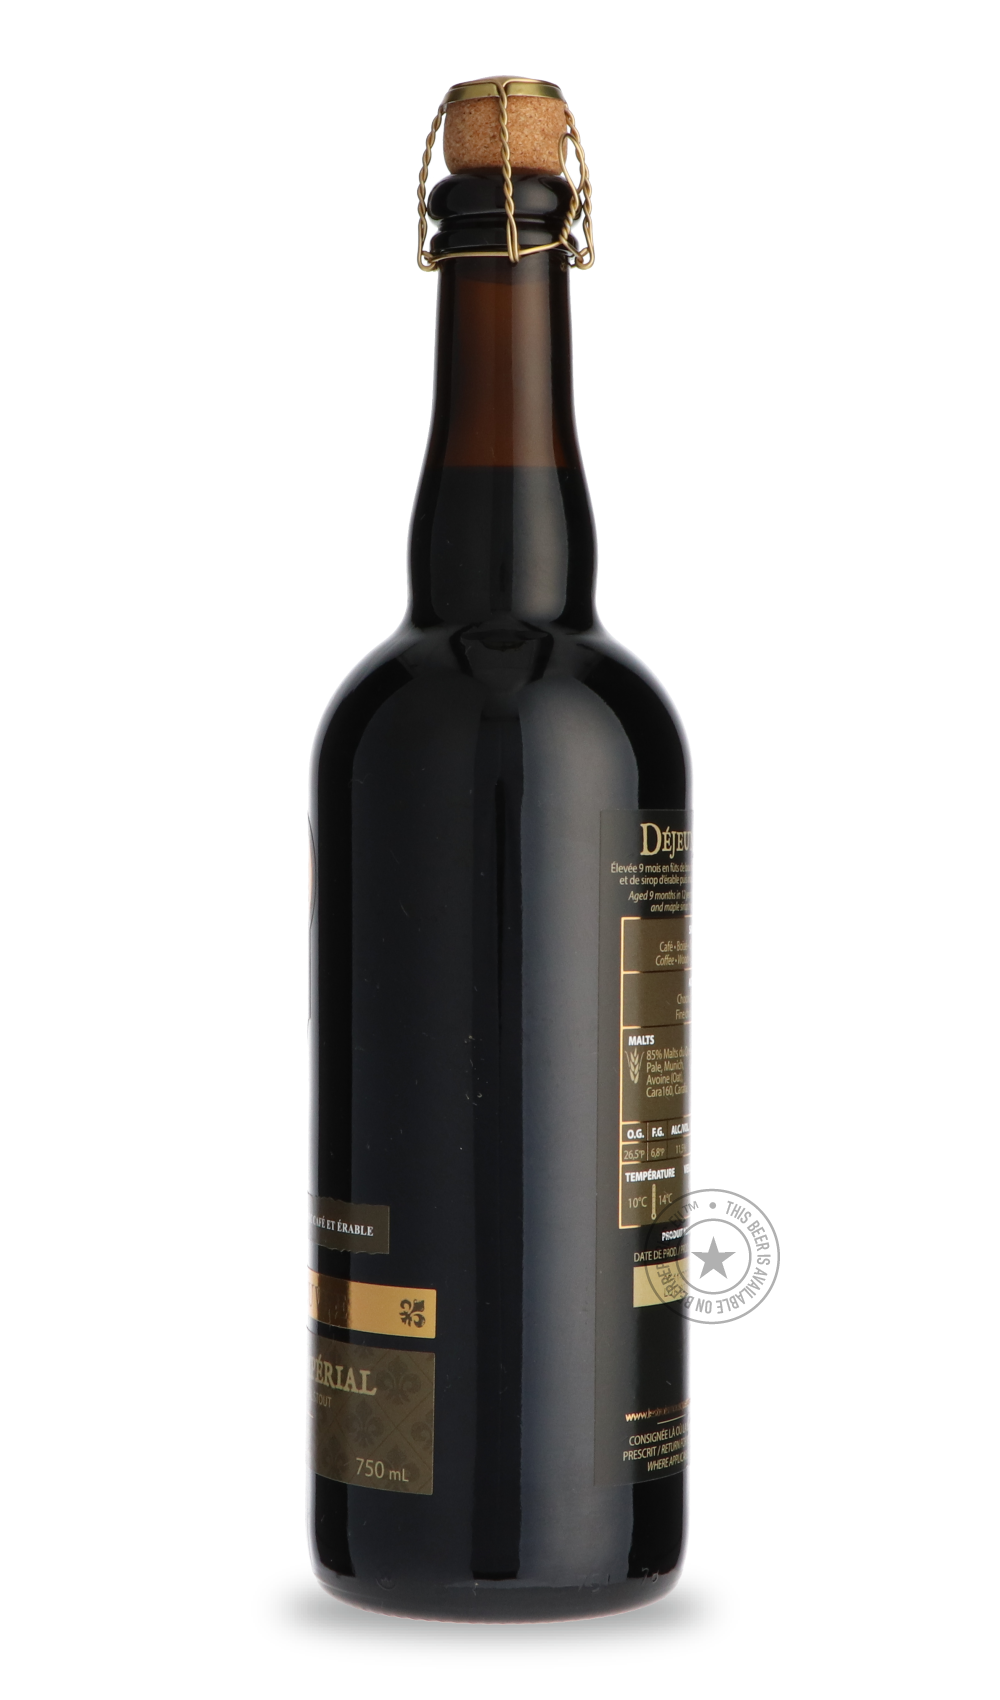 -Les Trois Mousquetaires- Déjeuner Impérial-Stout & Porter- Only @ Beer Republic - The best online beer store for American & Canadian craft beer - Buy beer online from the USA and Canada - Bier online kopen - Amerikaans bier kopen - Craft beer store - Craft beer kopen - Amerikanisch bier kaufen - Bier online kaufen - Acheter biere online - IPA - Stout - Porter - New England IPA - Hazy IPA - Imperial Stout - Barrel Aged - Barrel Aged Imperial Stout - Brown - Dark beer - Blond - Blonde - Pilsner - Lager - Whe